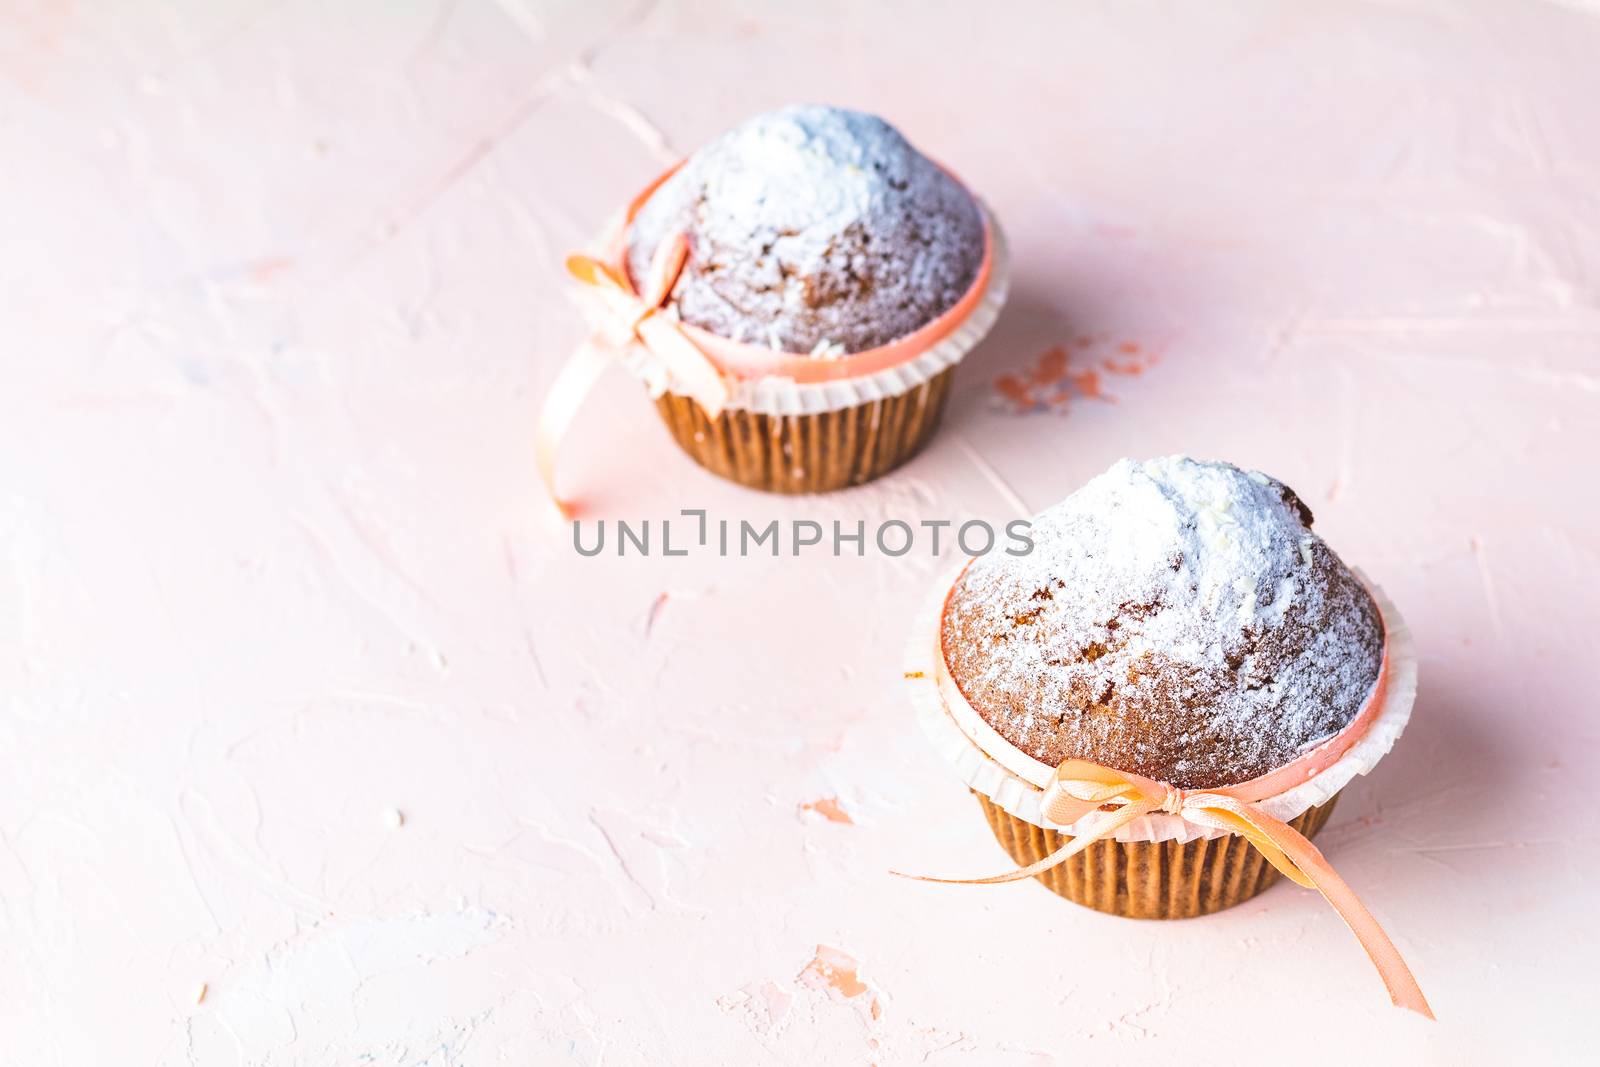 Homemade muffin on light pink living coral stone concrete surfac by ArtSvitlyna